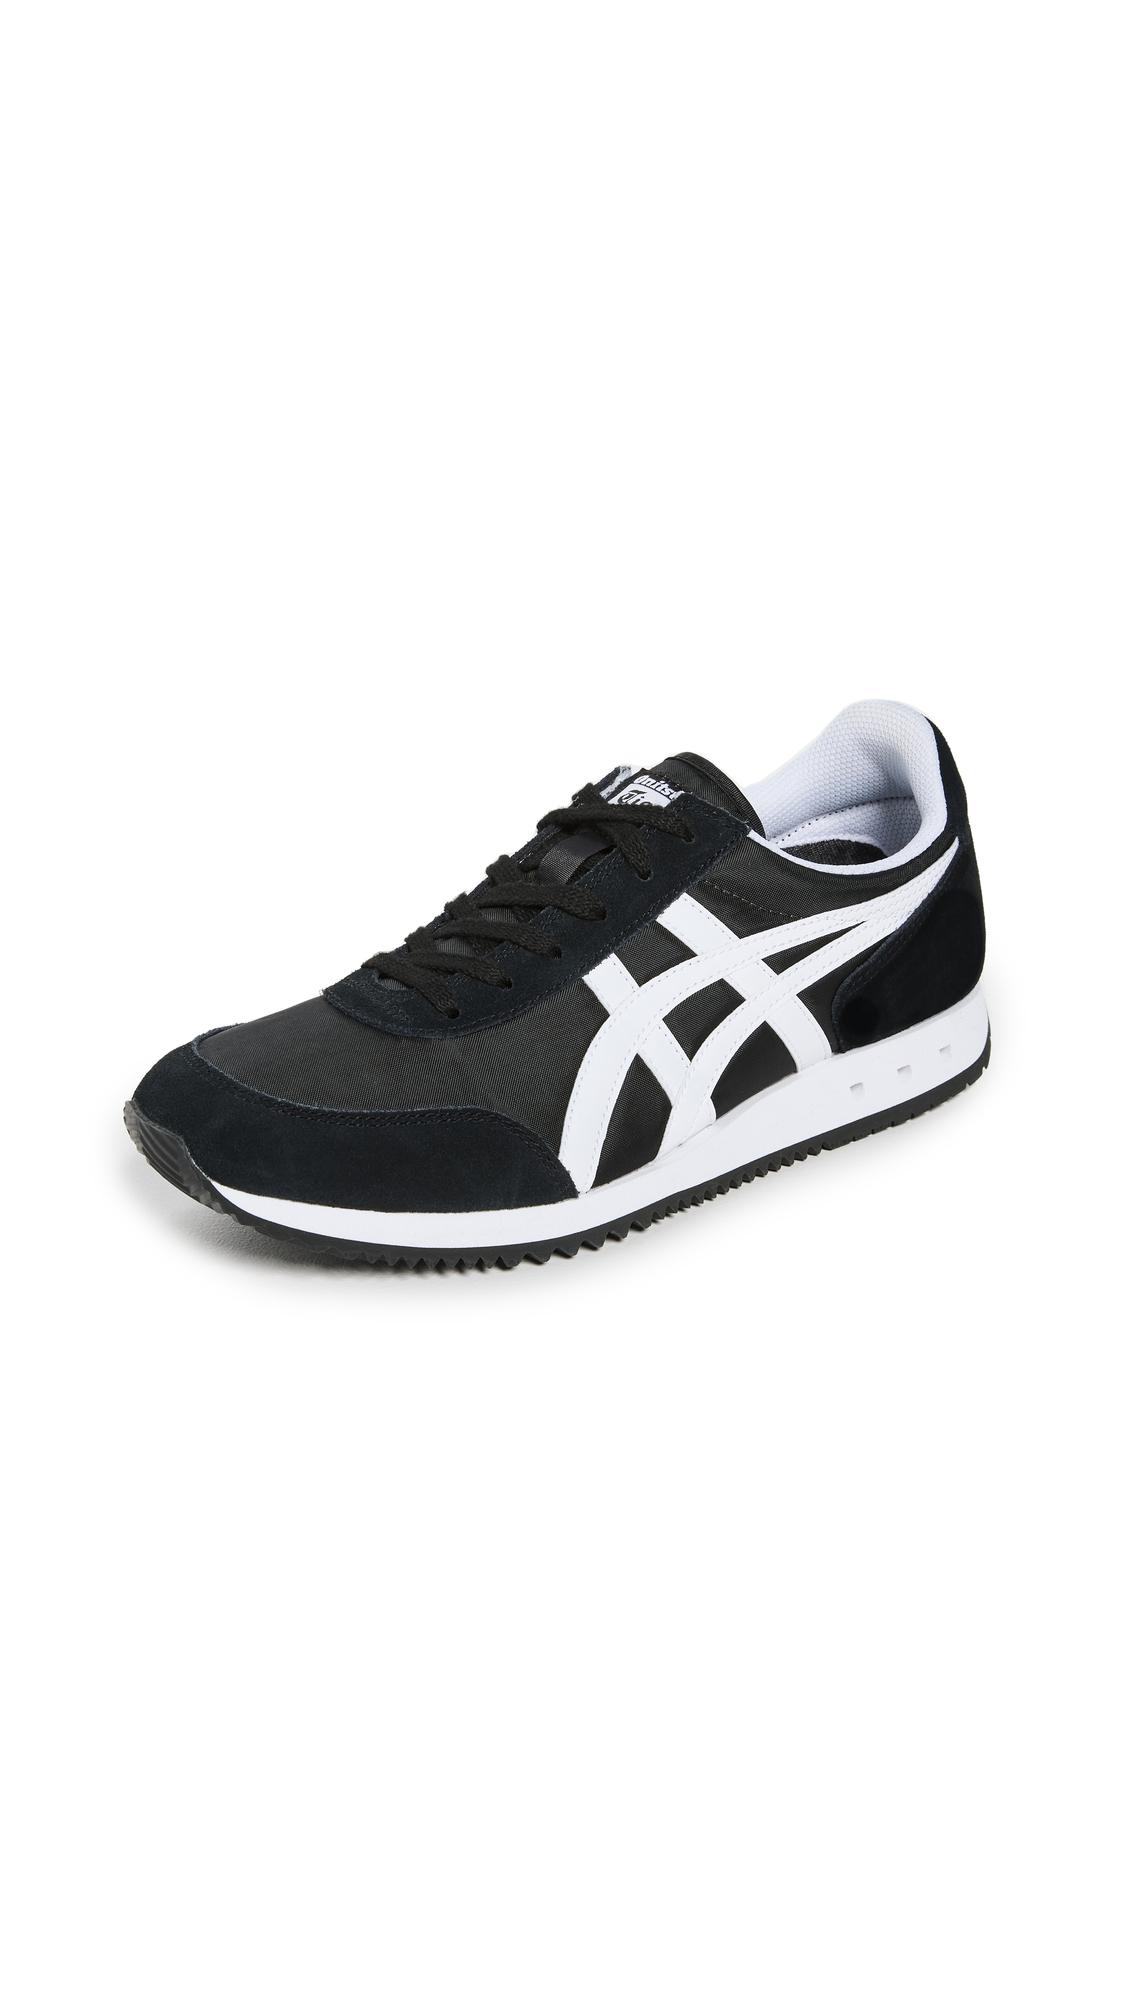 Onitsuka Tiger New York Sneakers in Black | Lyst